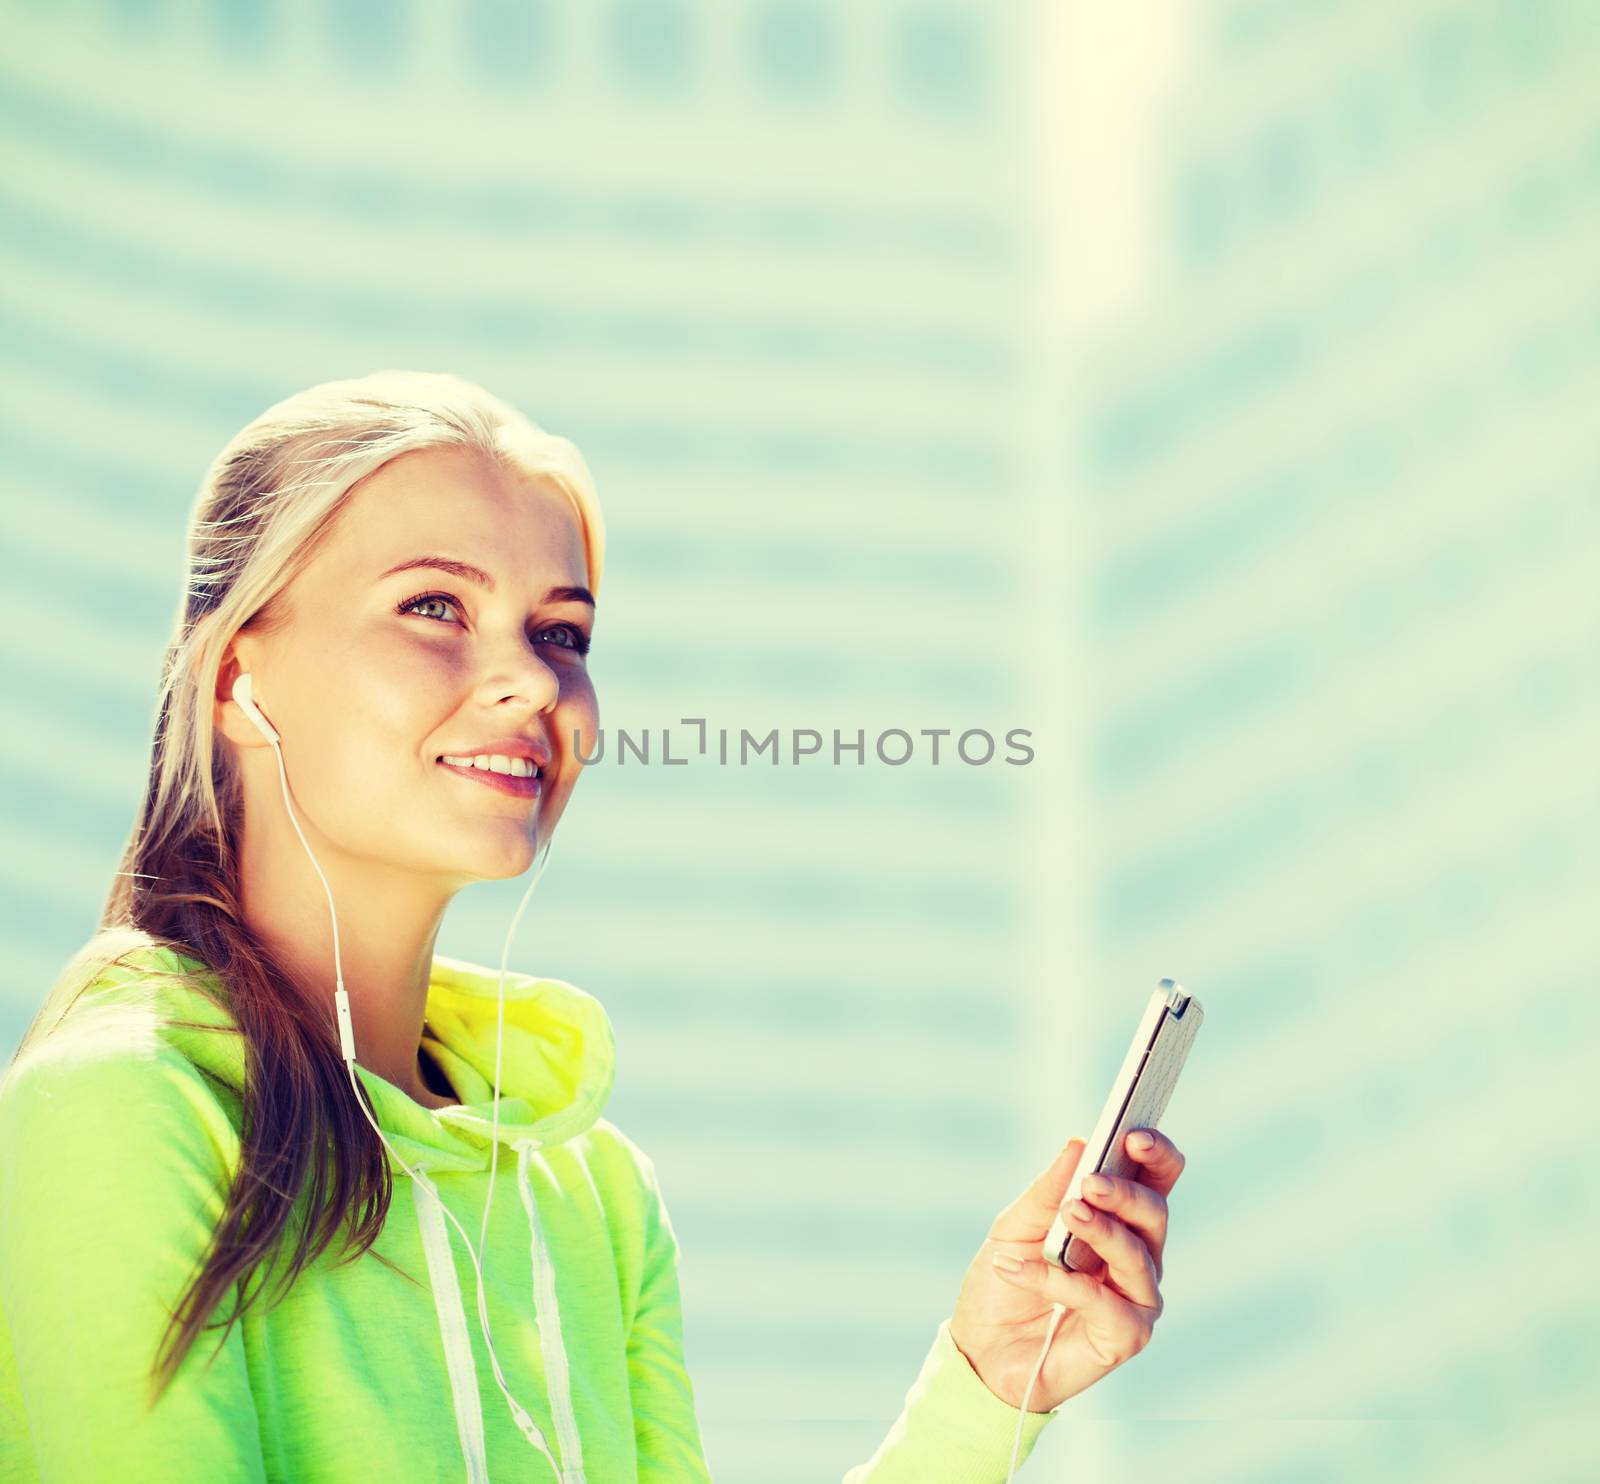 sport and lifestyle concept - woman doing sports and listening to music outdoors